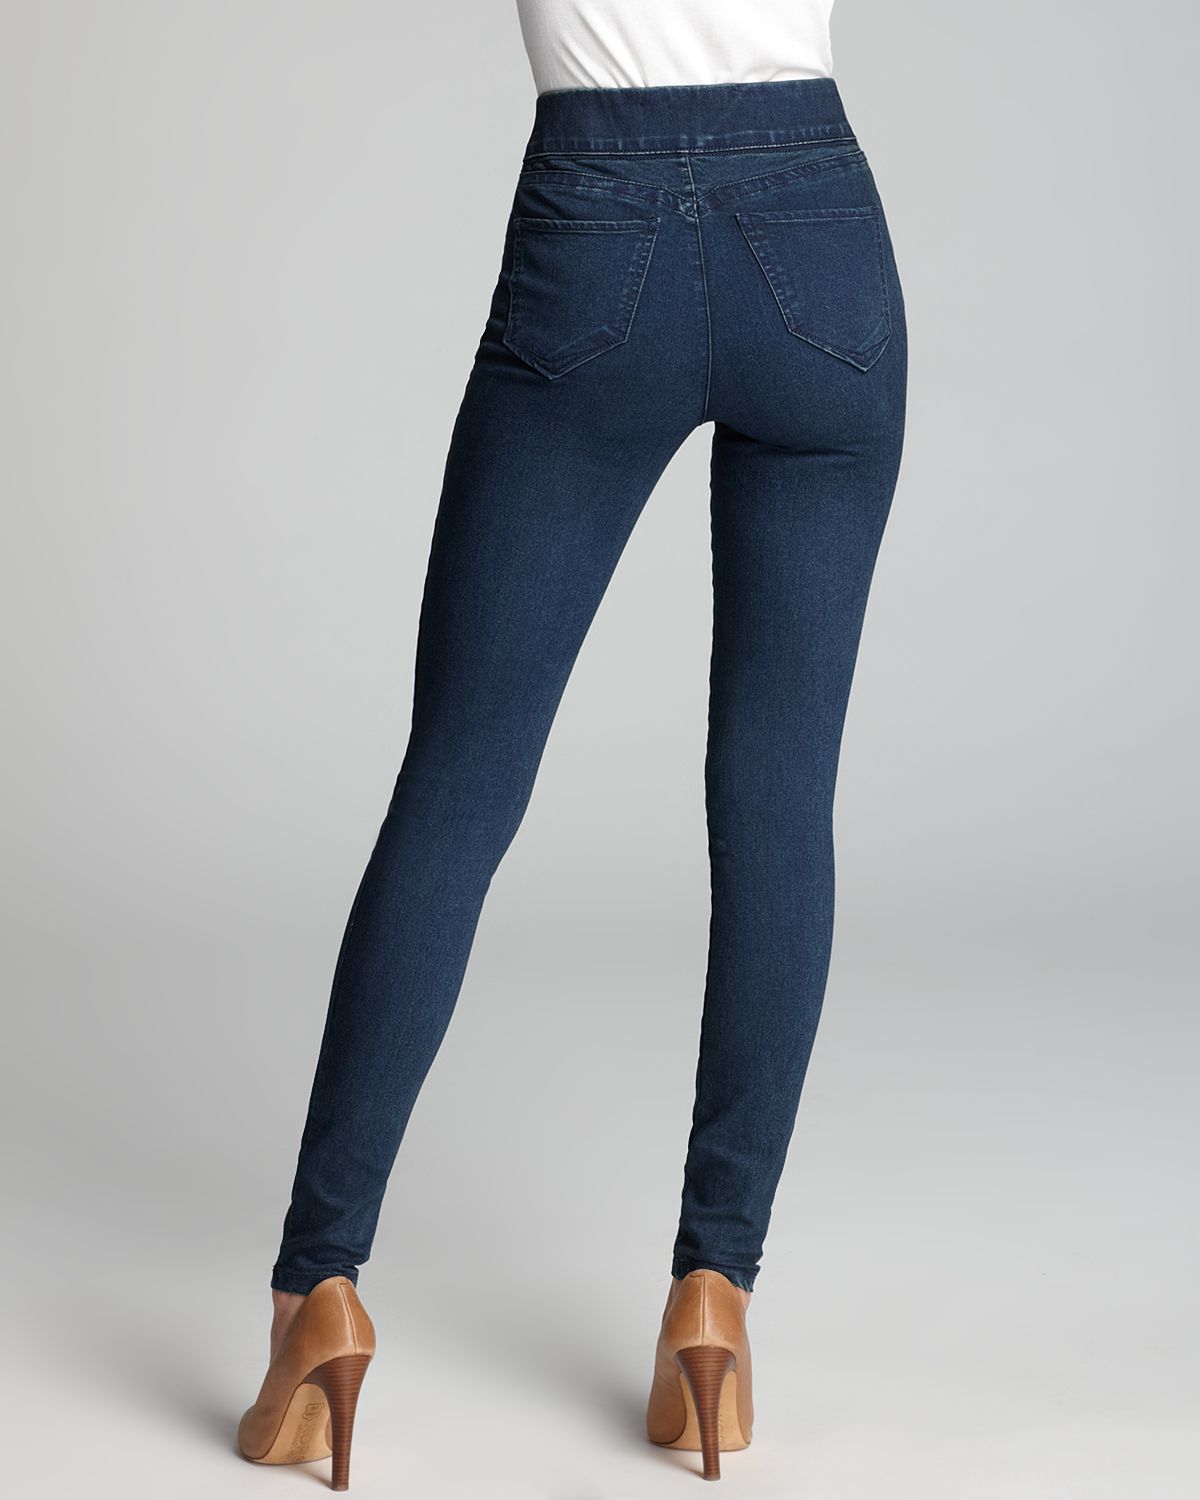 Stretch Blue Jean Leggings  International Society of Precision Agriculture